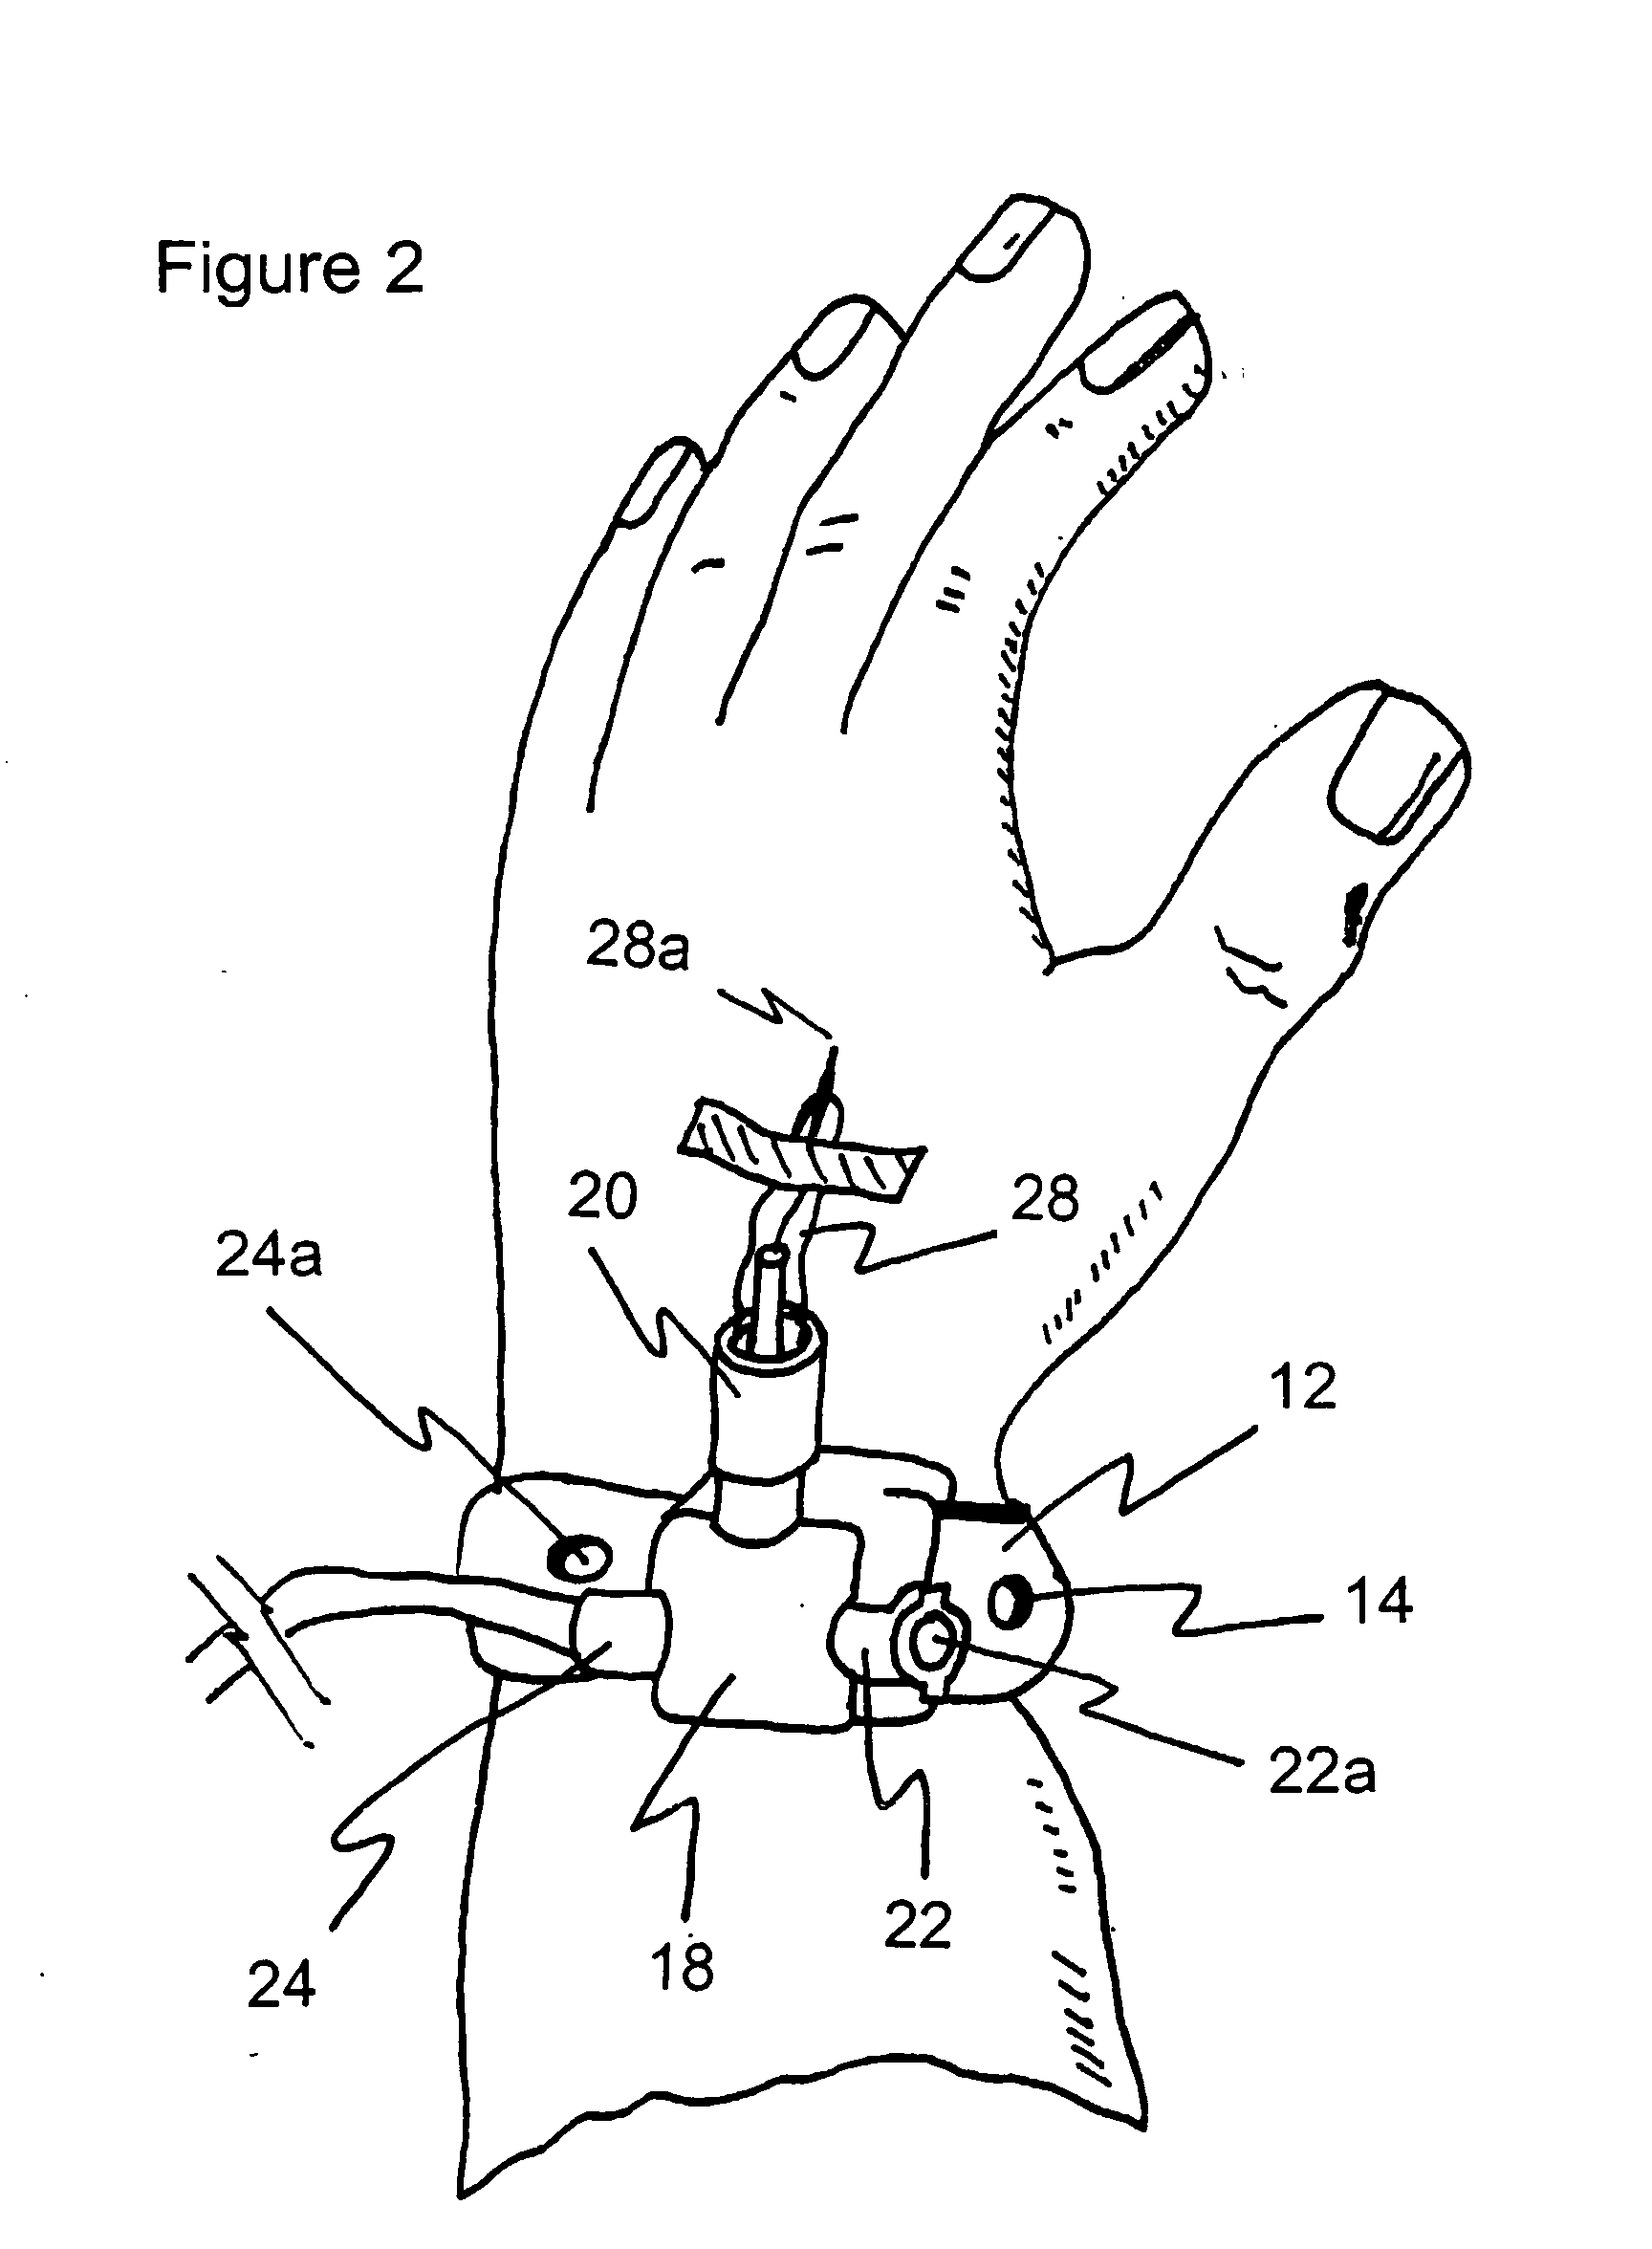 Multiport infusion device